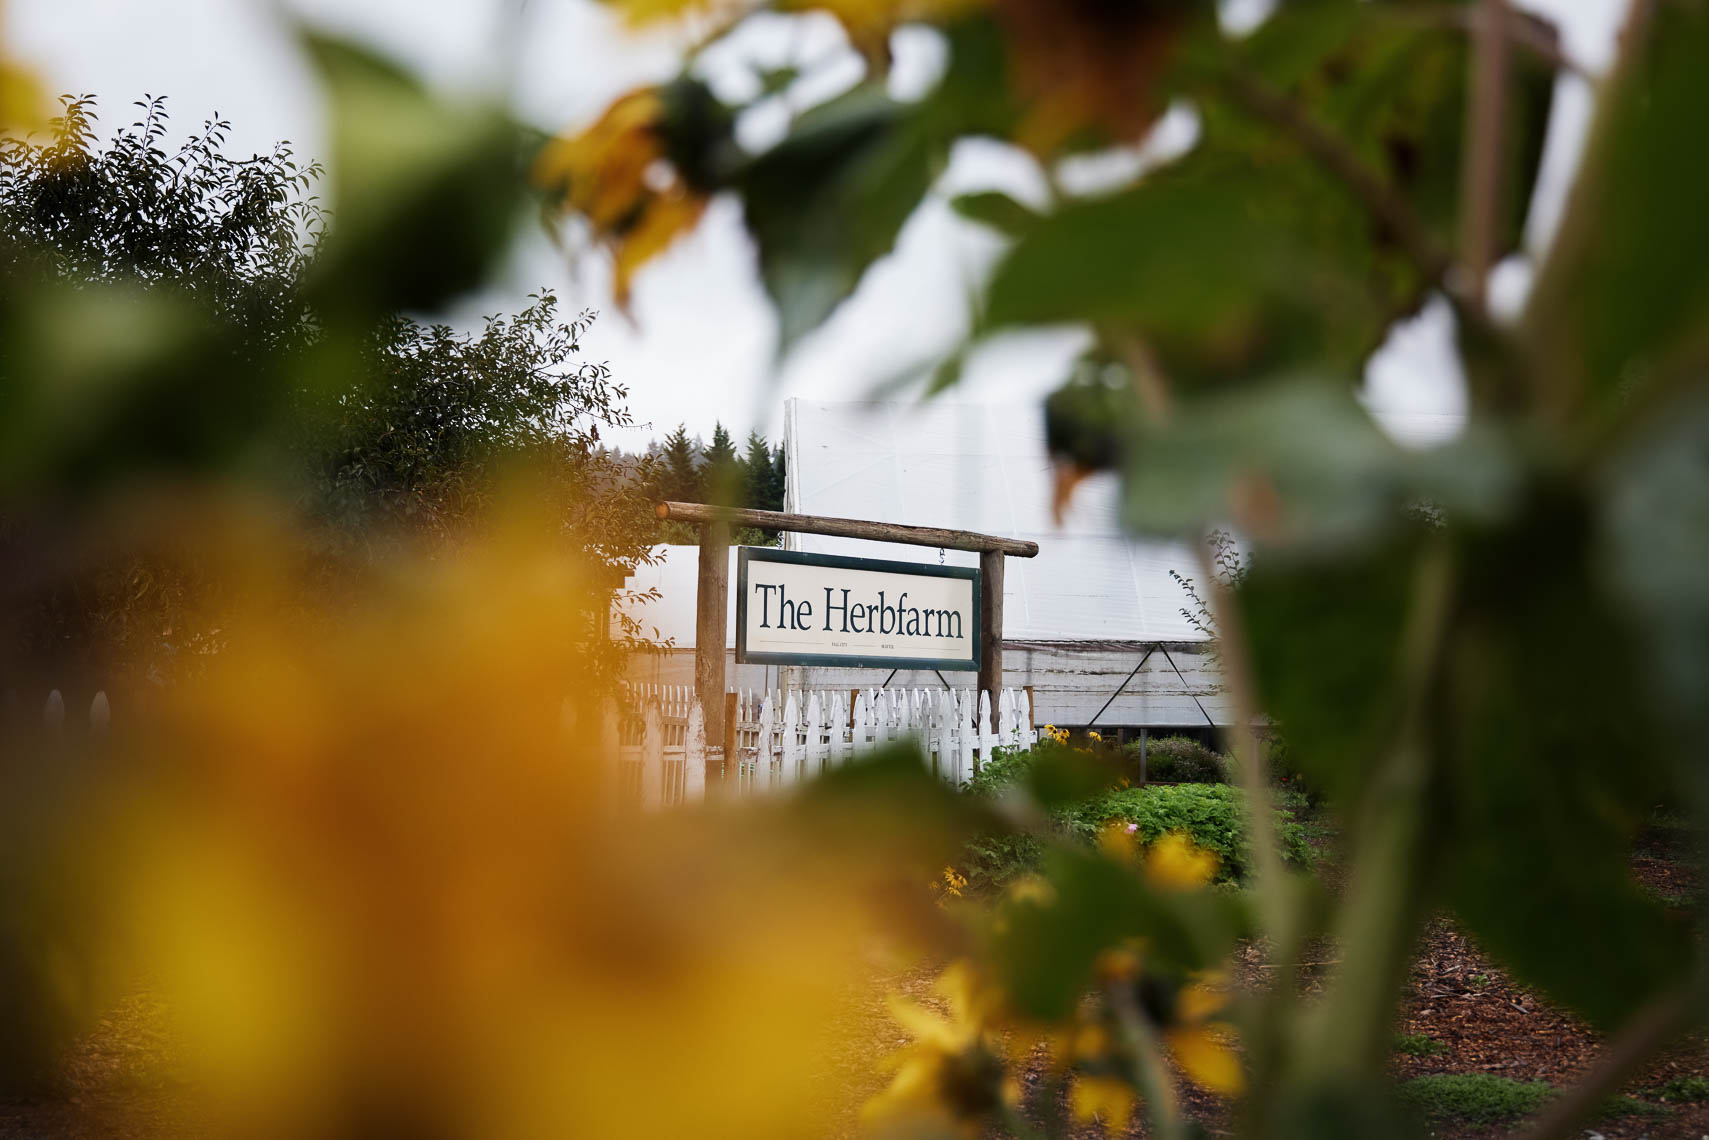 Fine Dining Review of Herbfarm in Woodinville, Washington